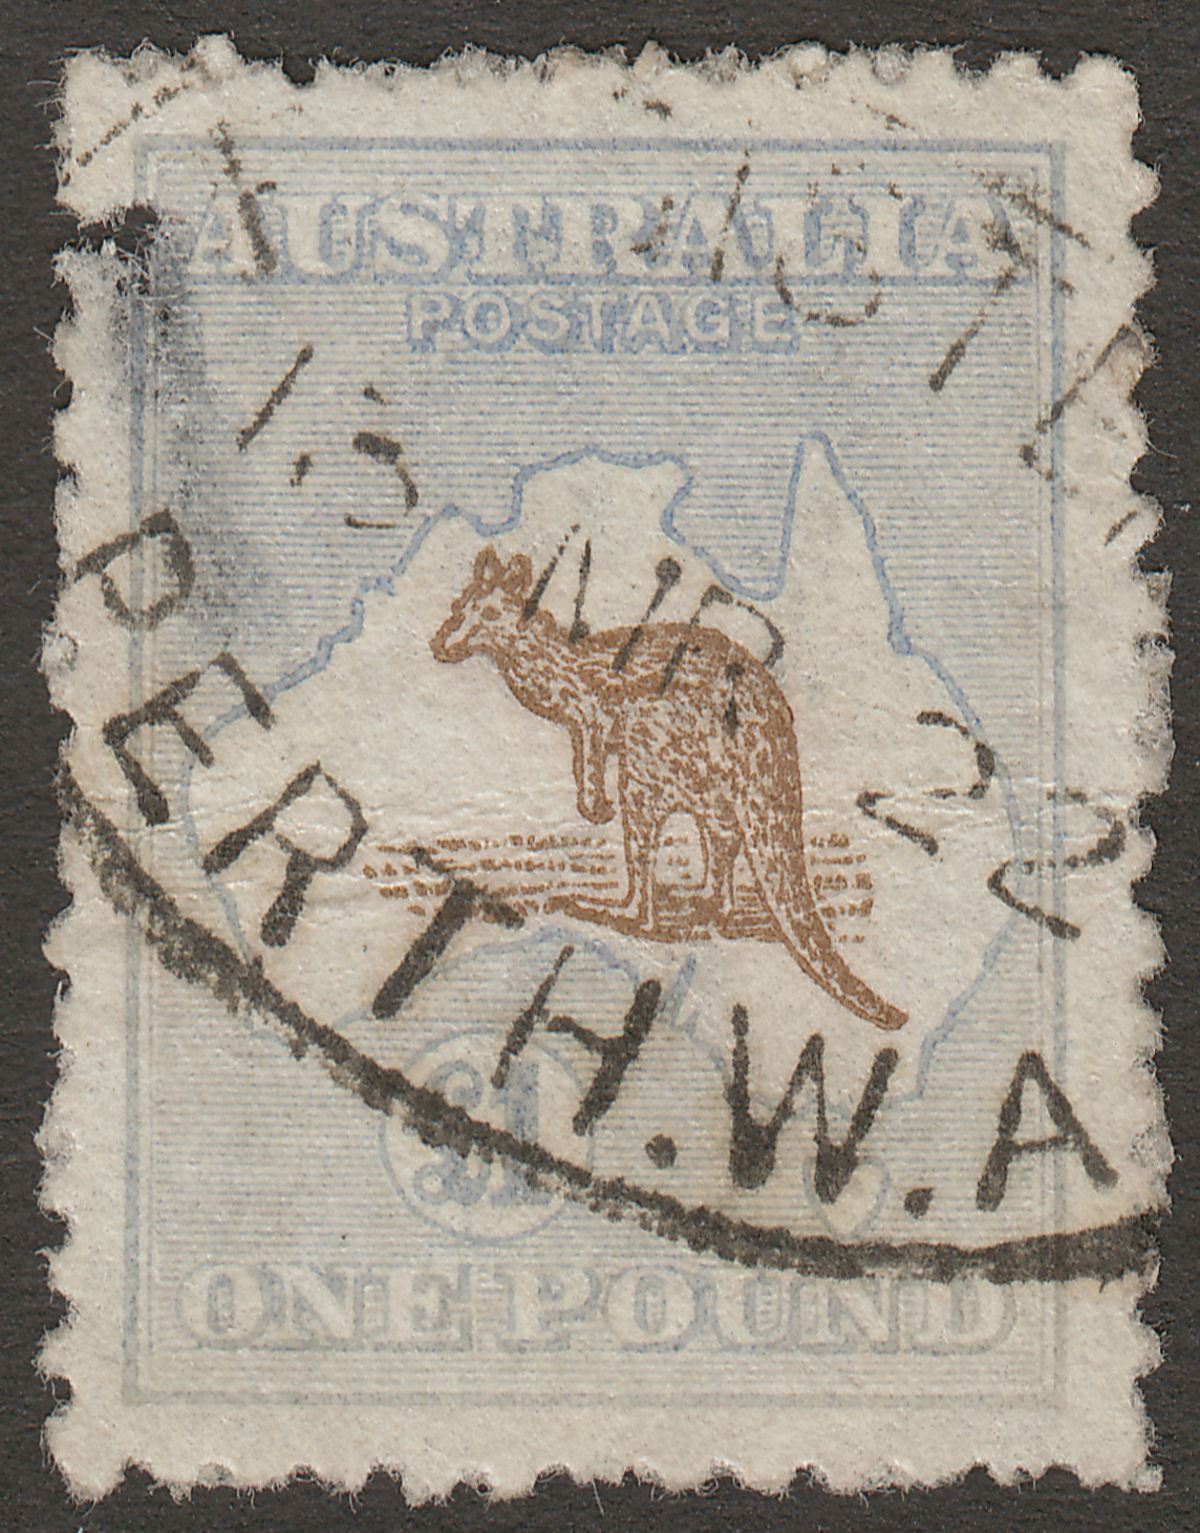 Australia 1916 KGV Roo £1 Brown + Pale Blue Used SG44 cat £1600 Faulty with hole